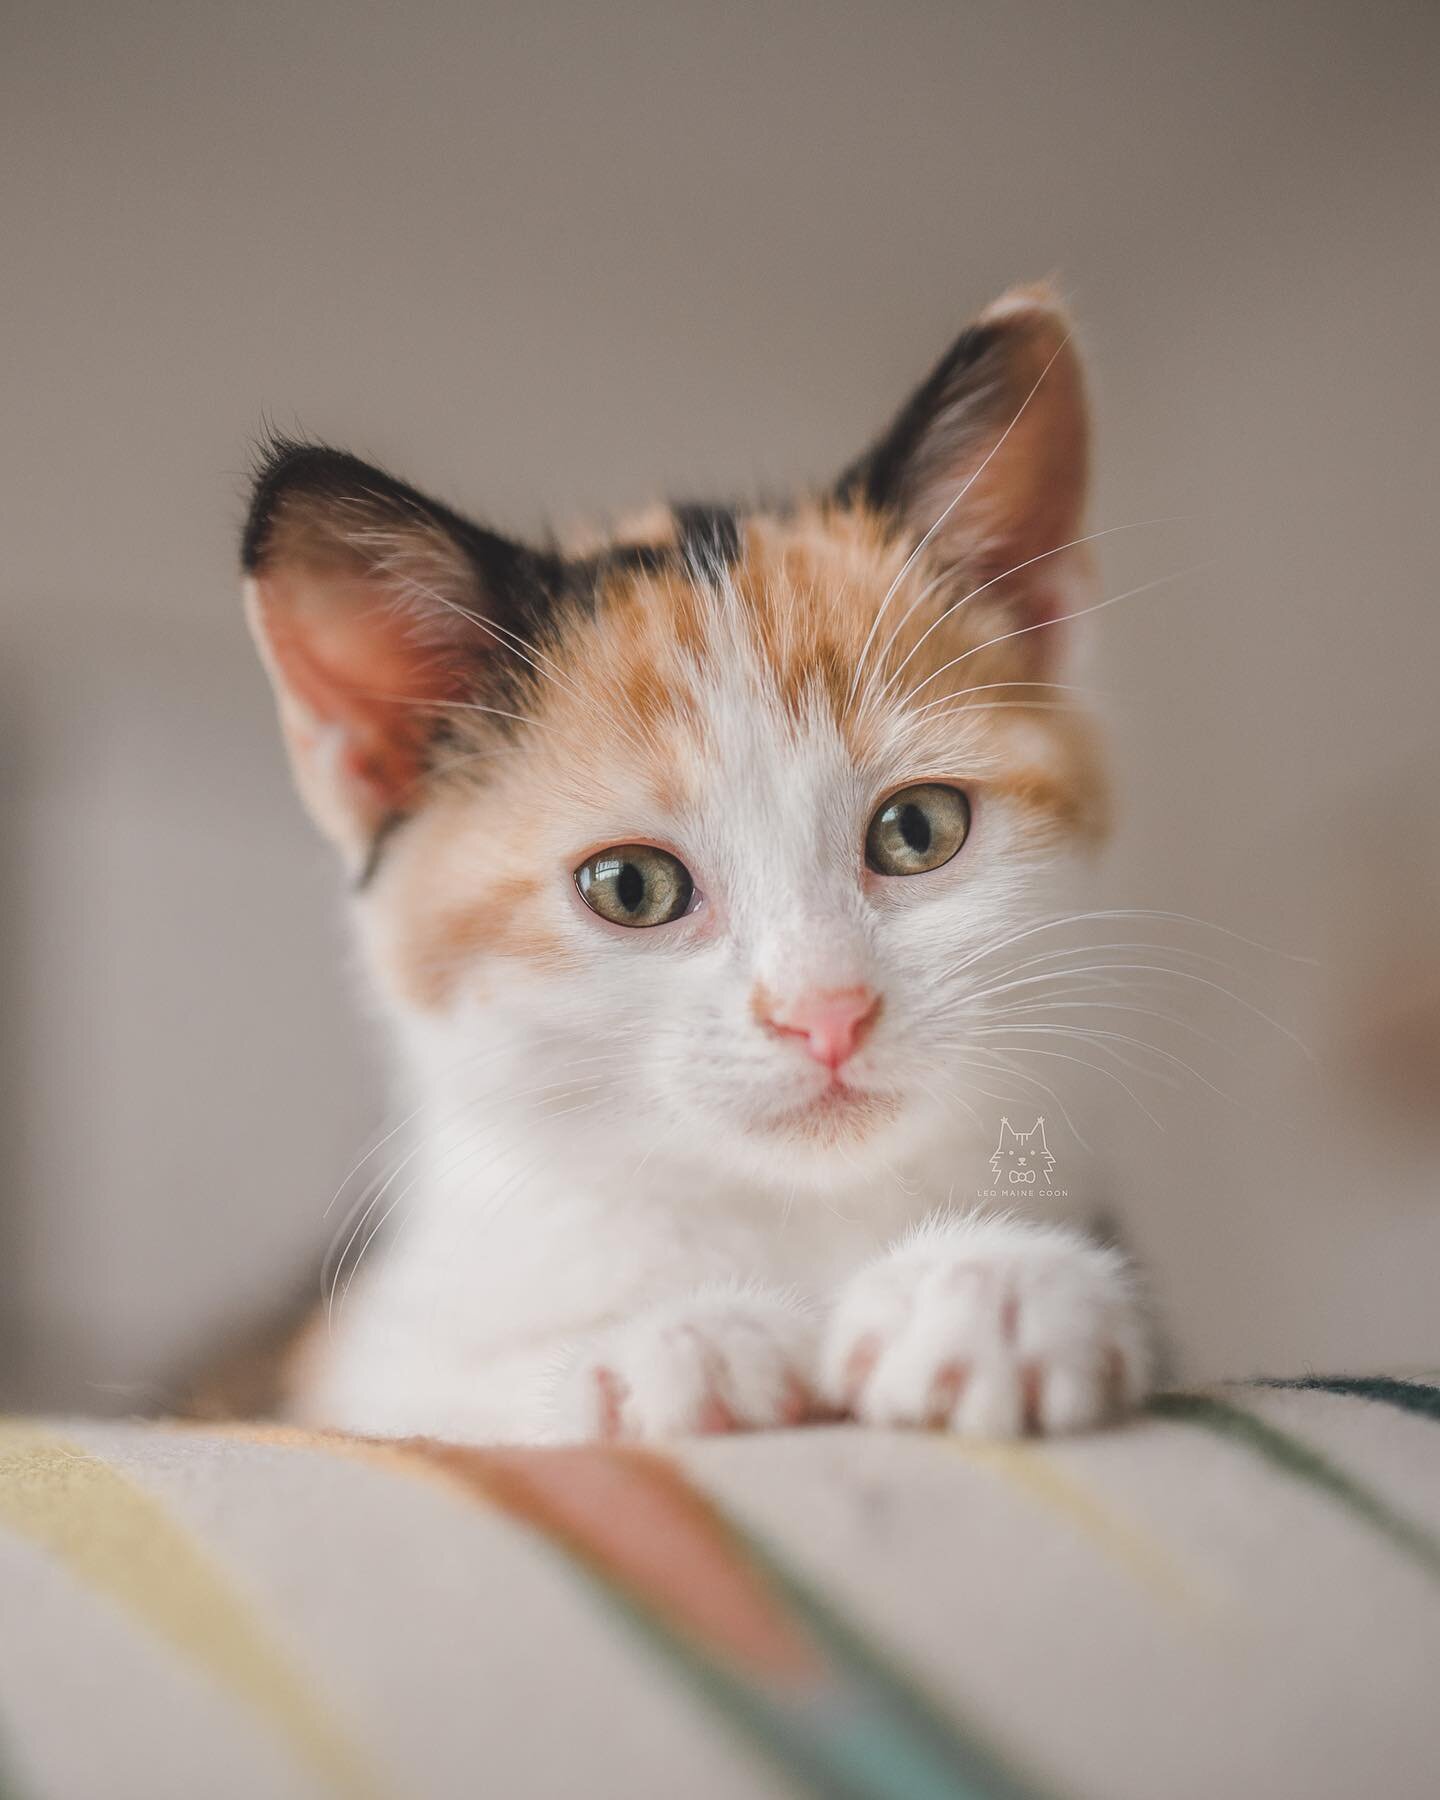 baby pie! 🥰

this was edited using our SPRING 05 preset &hearts;️
please check them out in our bio, if you haven&rsquo;t already! all money raised will go towards sophie&rsquo;s vet bills.
a HUGE thank you to anyone who has ordered already 🥺&hearts